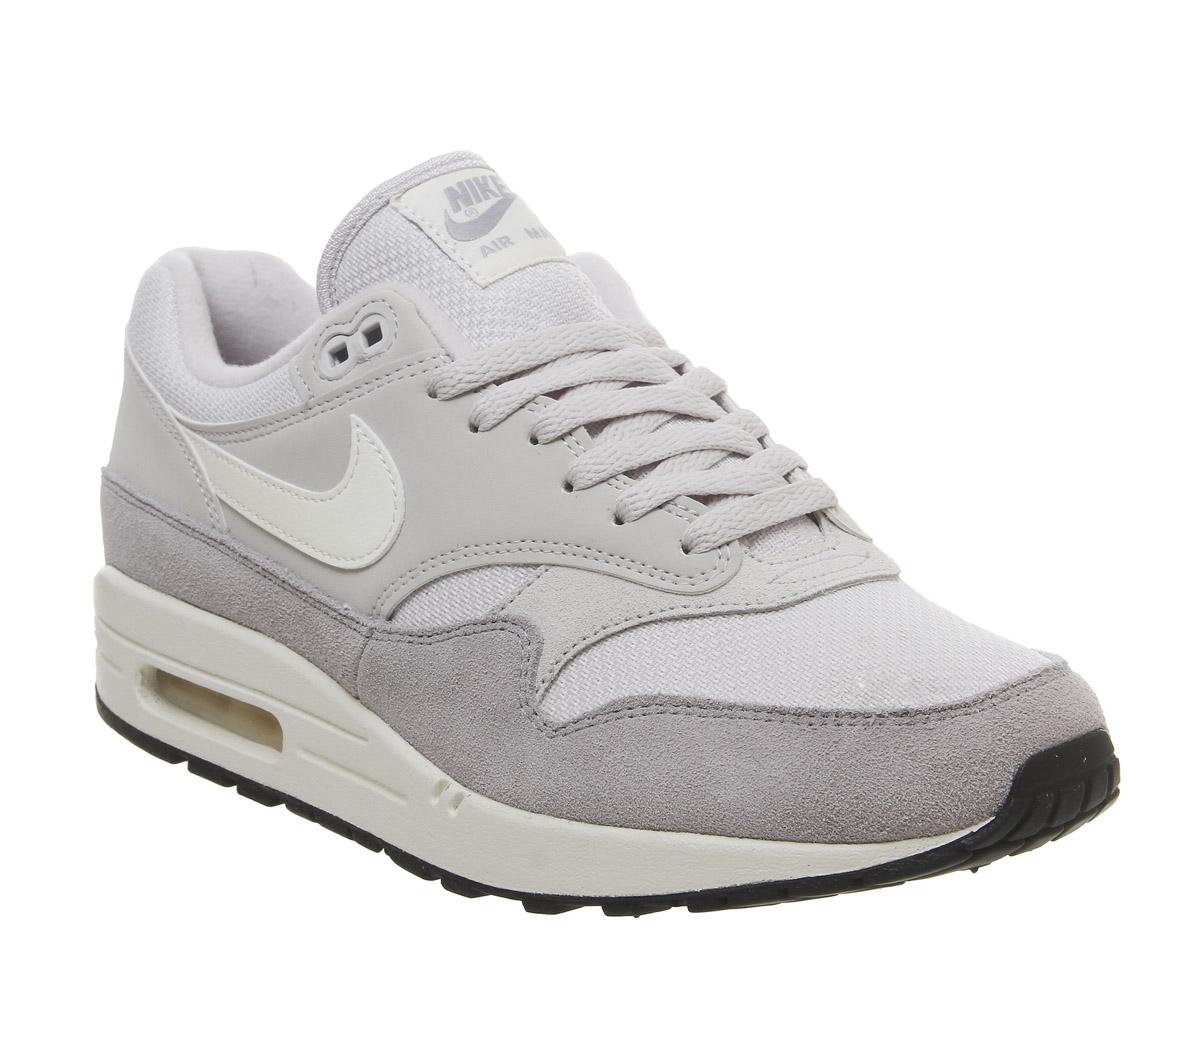 Nike Air Max 1 Trainers Vast Grey Sail Wolf Grey - His trainers